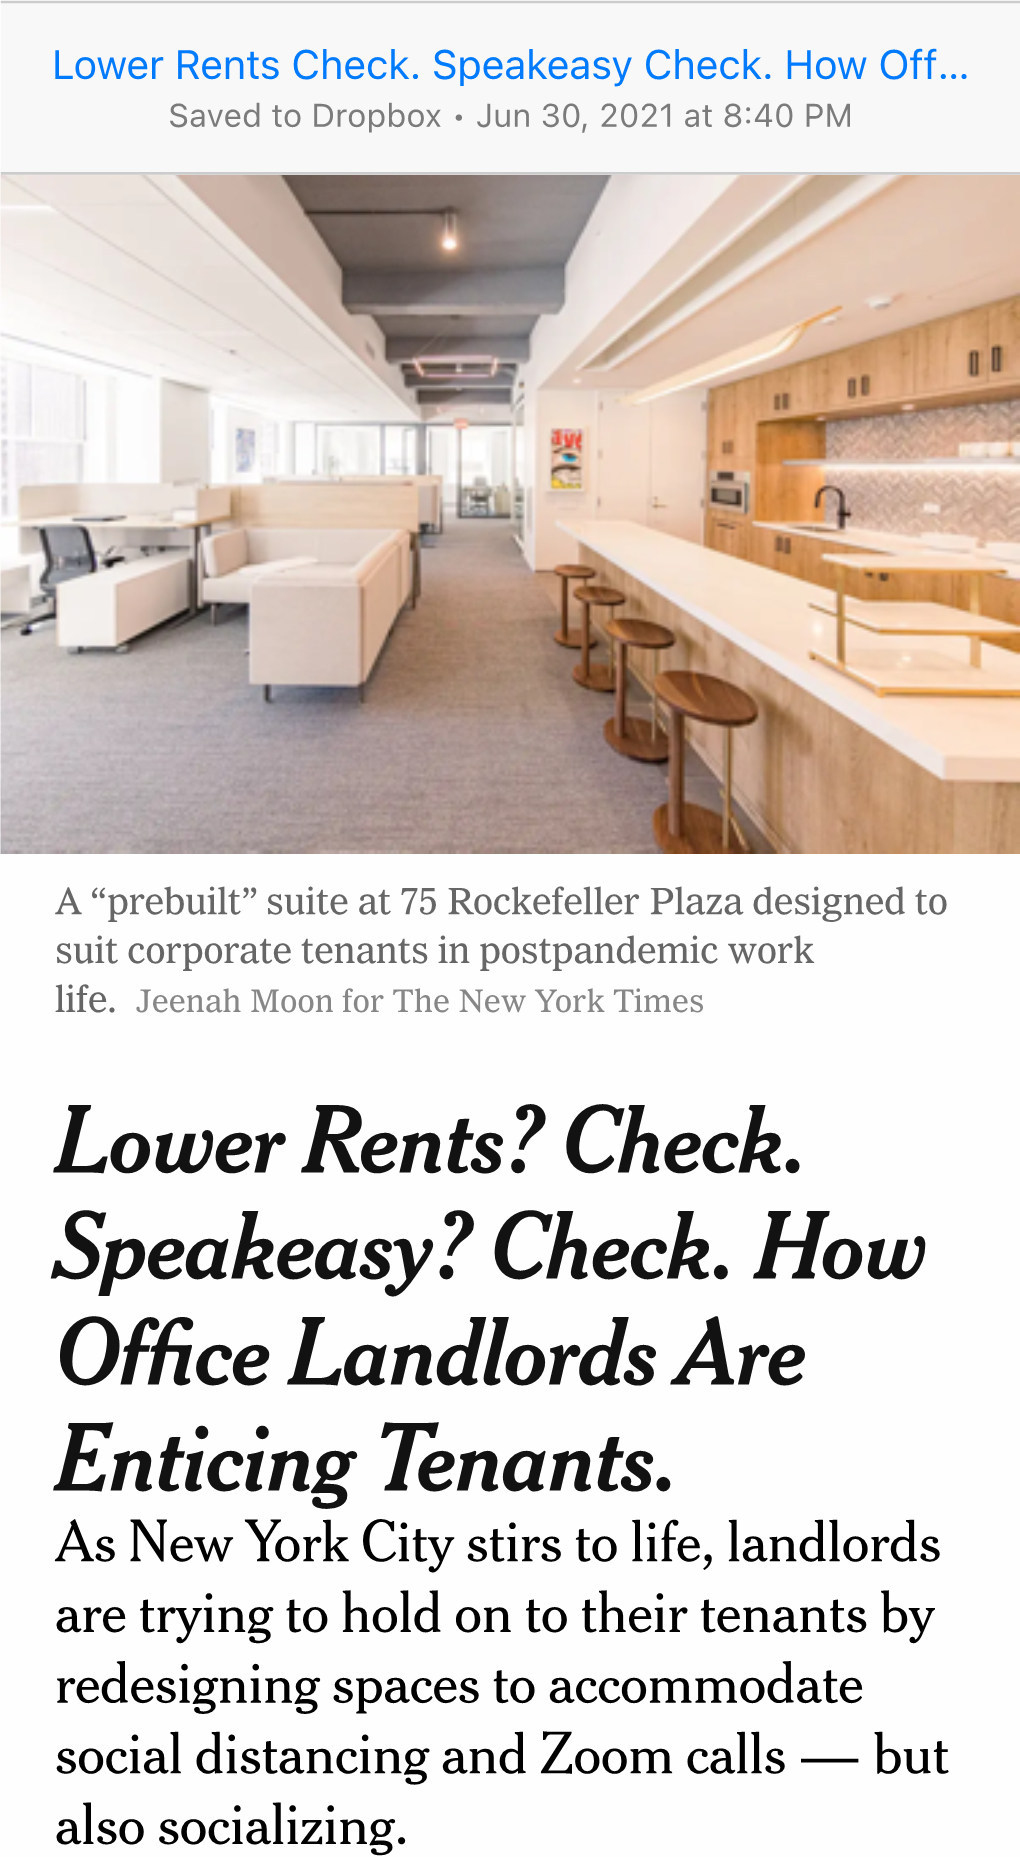 Check. How Office Landlords Are Enticing Tenants. Lower Rents?